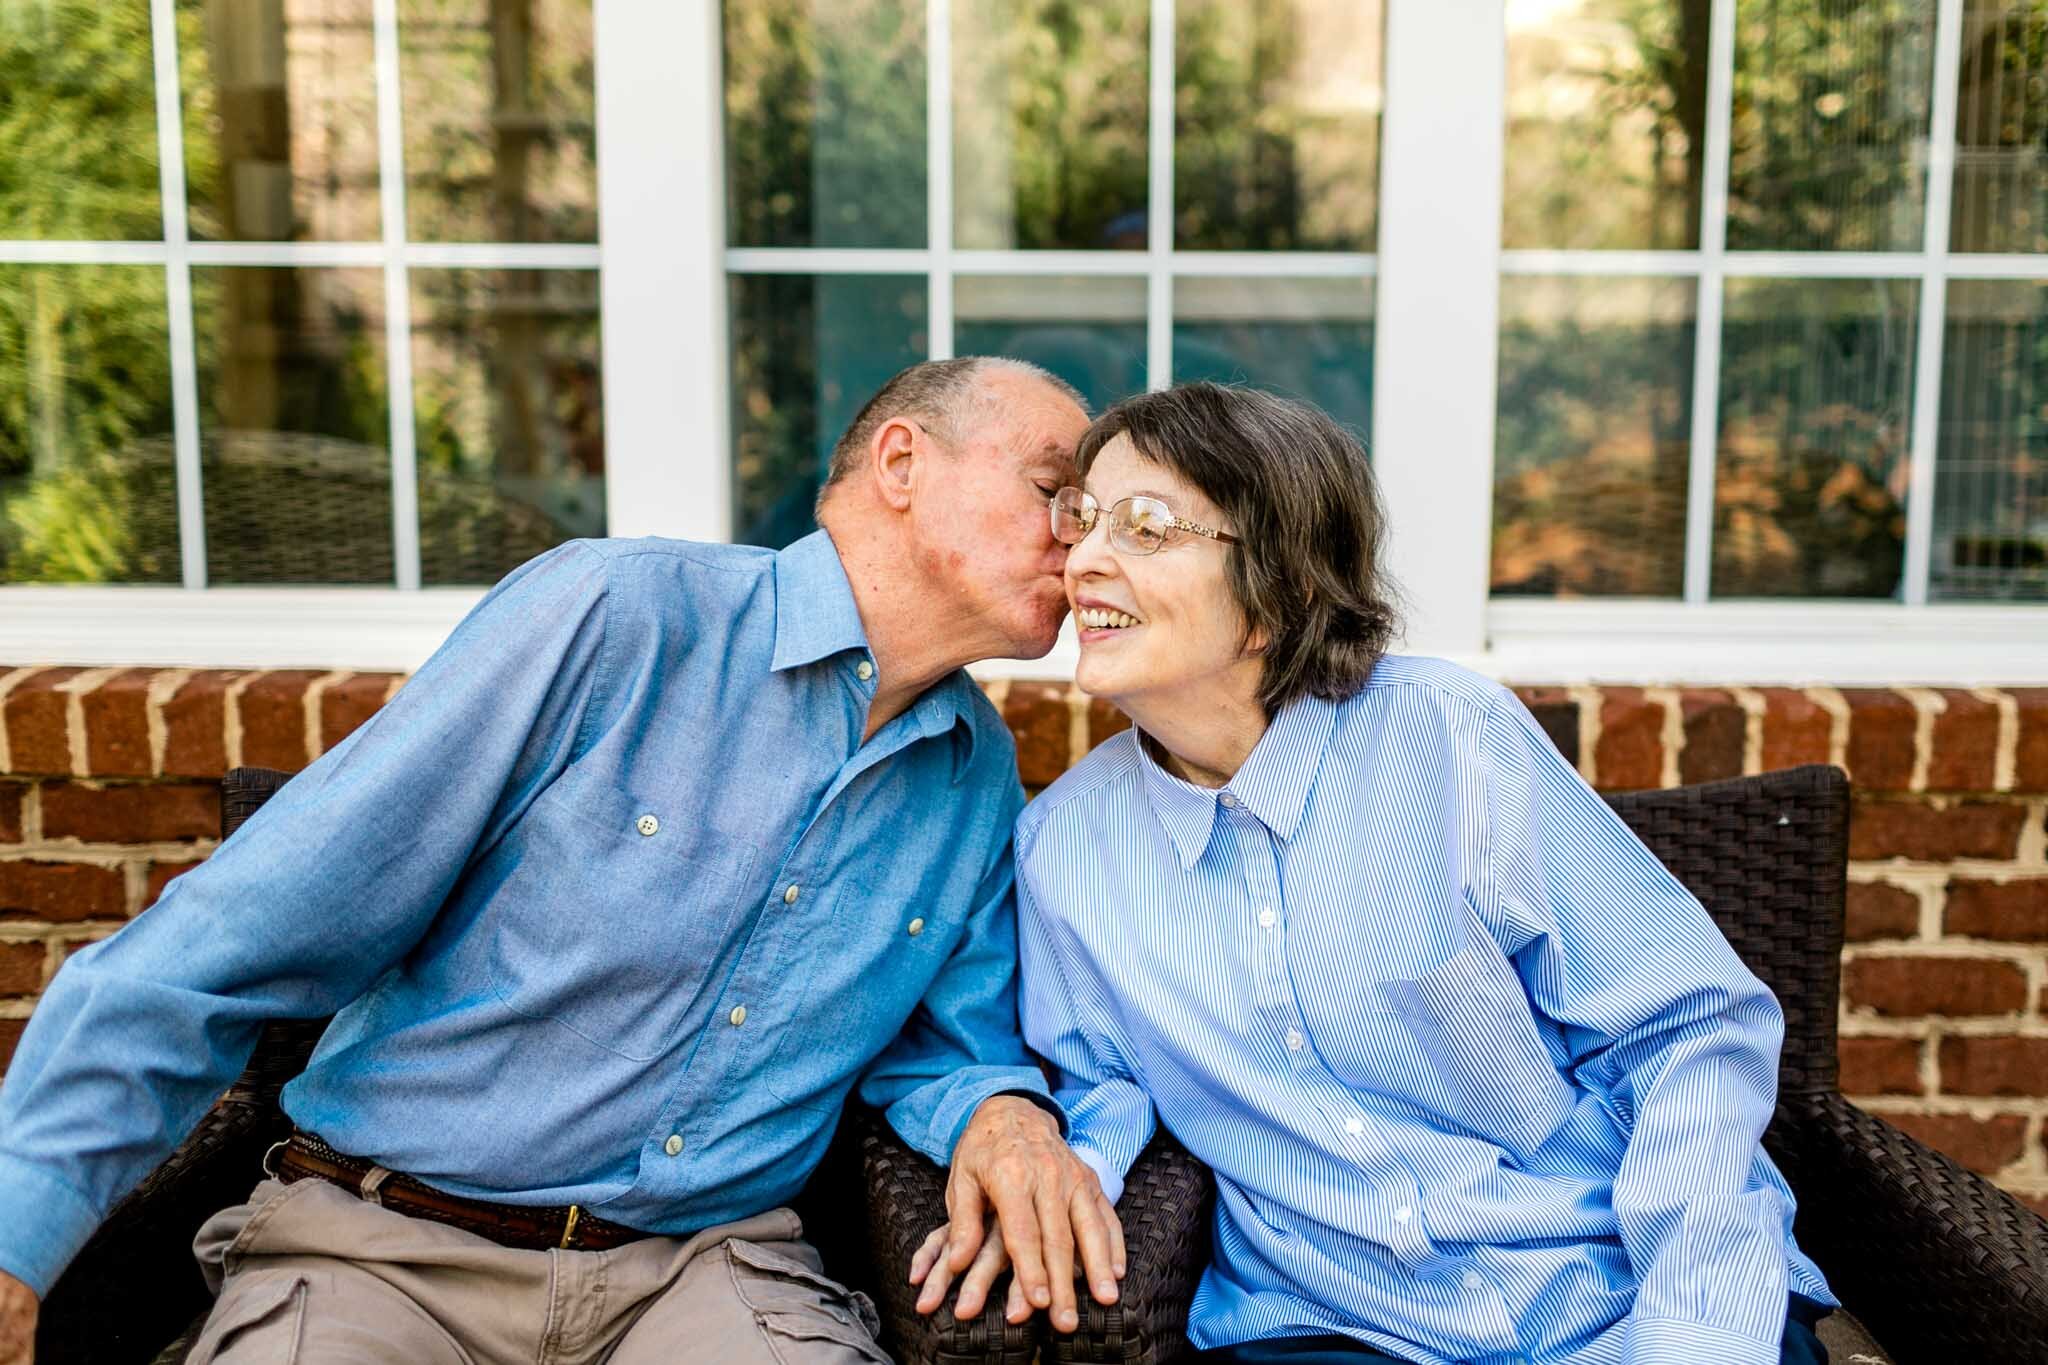 Raleigh Family Photographer | By G. Lin Photography | Husband kissing wife on cheek